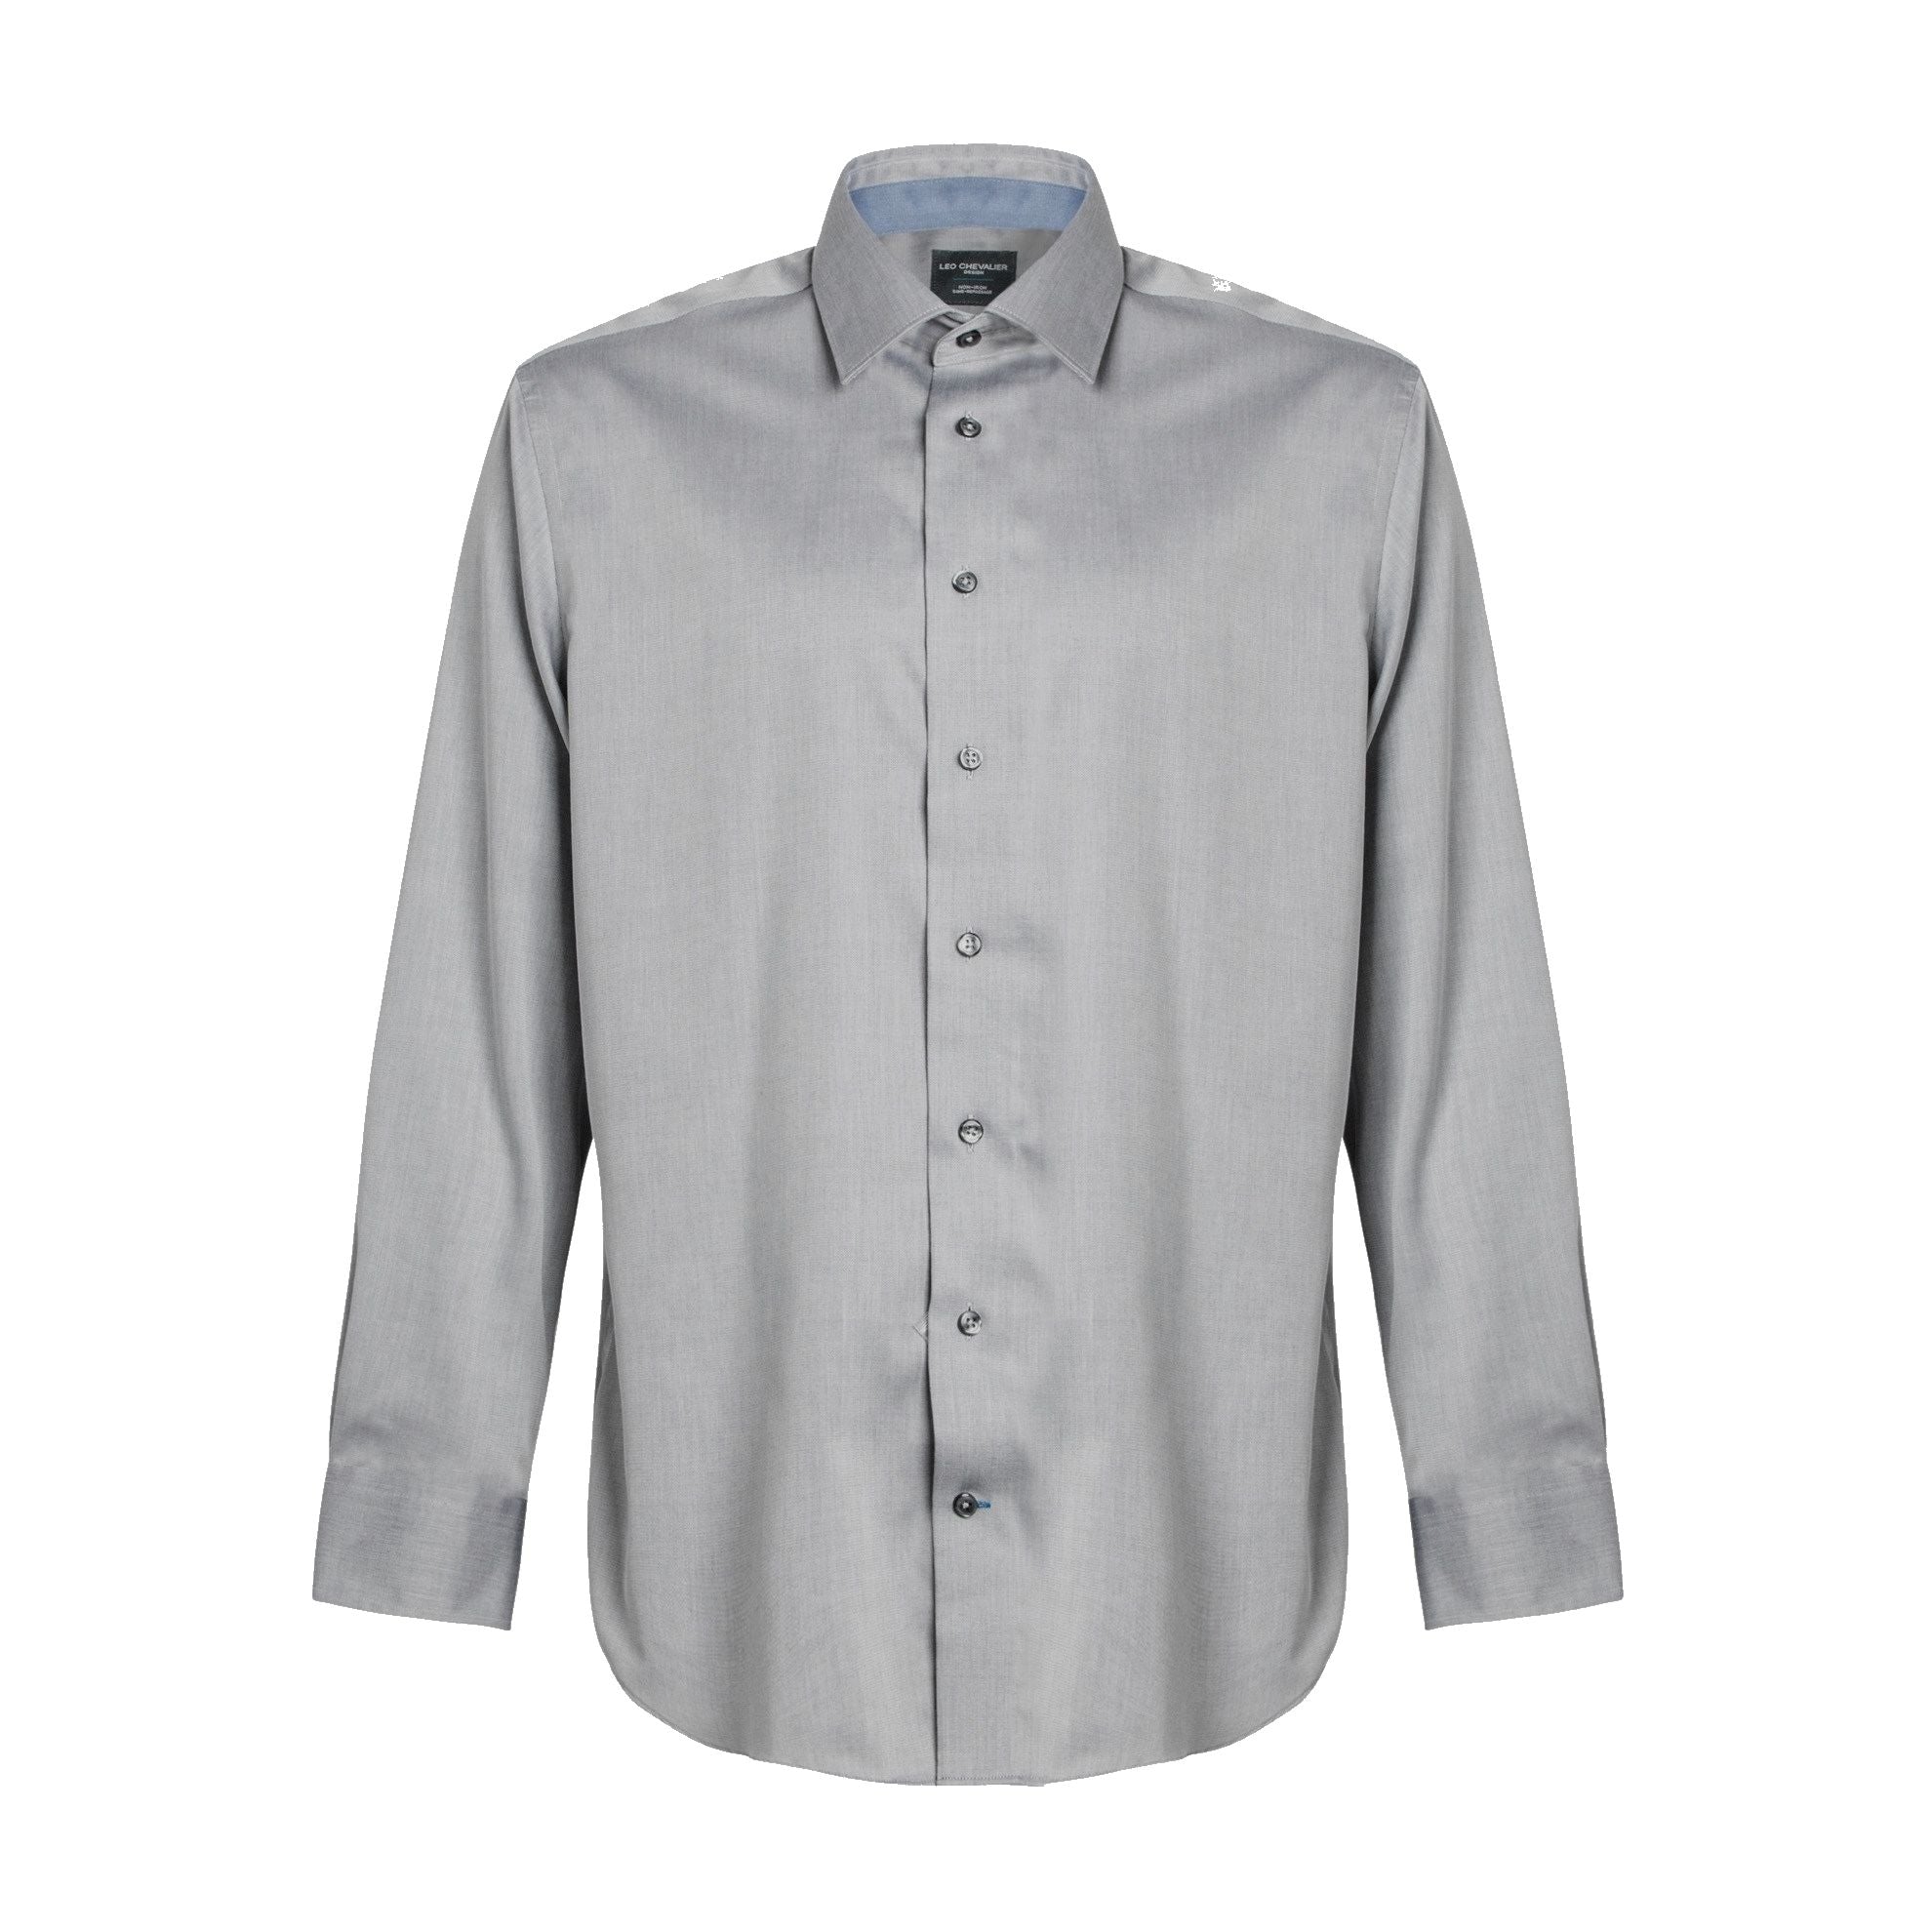 No-Iron Cotton Dress Shirt with Spread Collar in Grey (Regular Fit) by Leo Chevalier